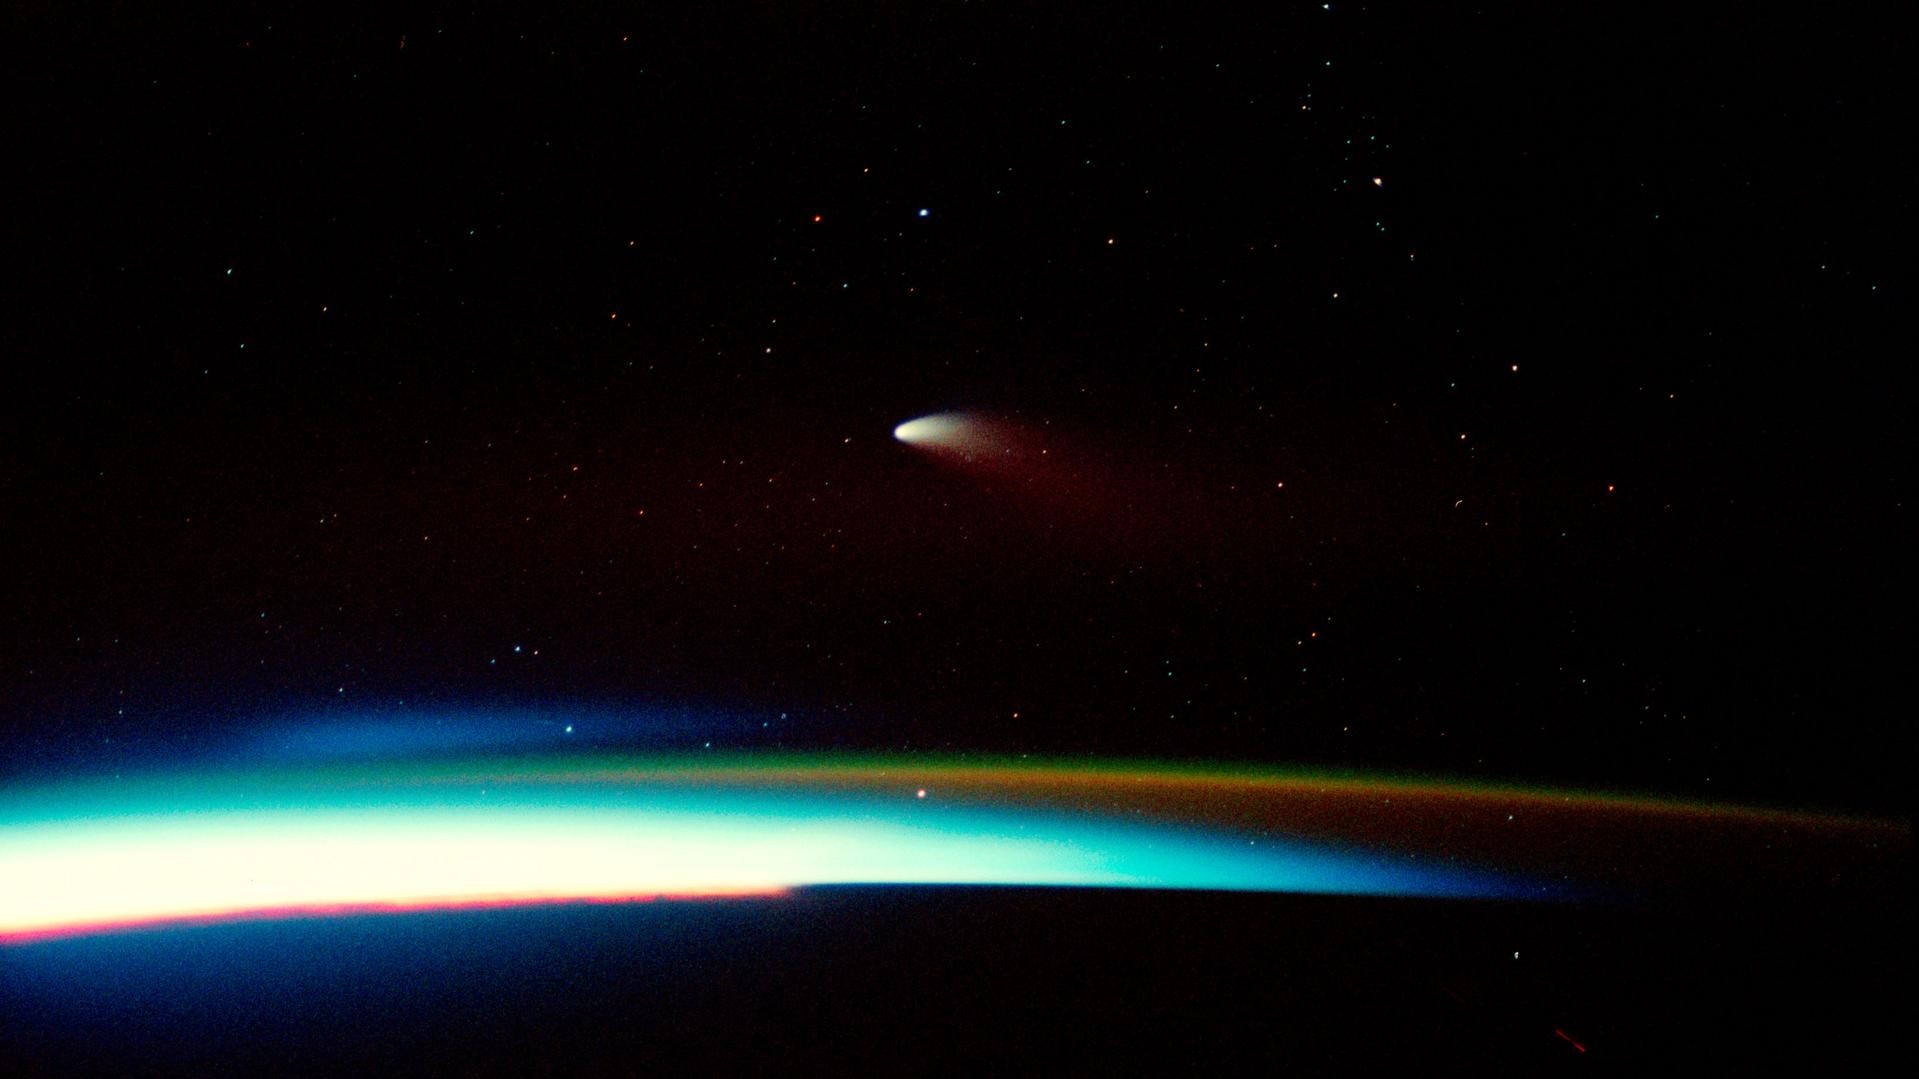 Comet Hale-Bopp was discovered during NASA's STS-83 mission.